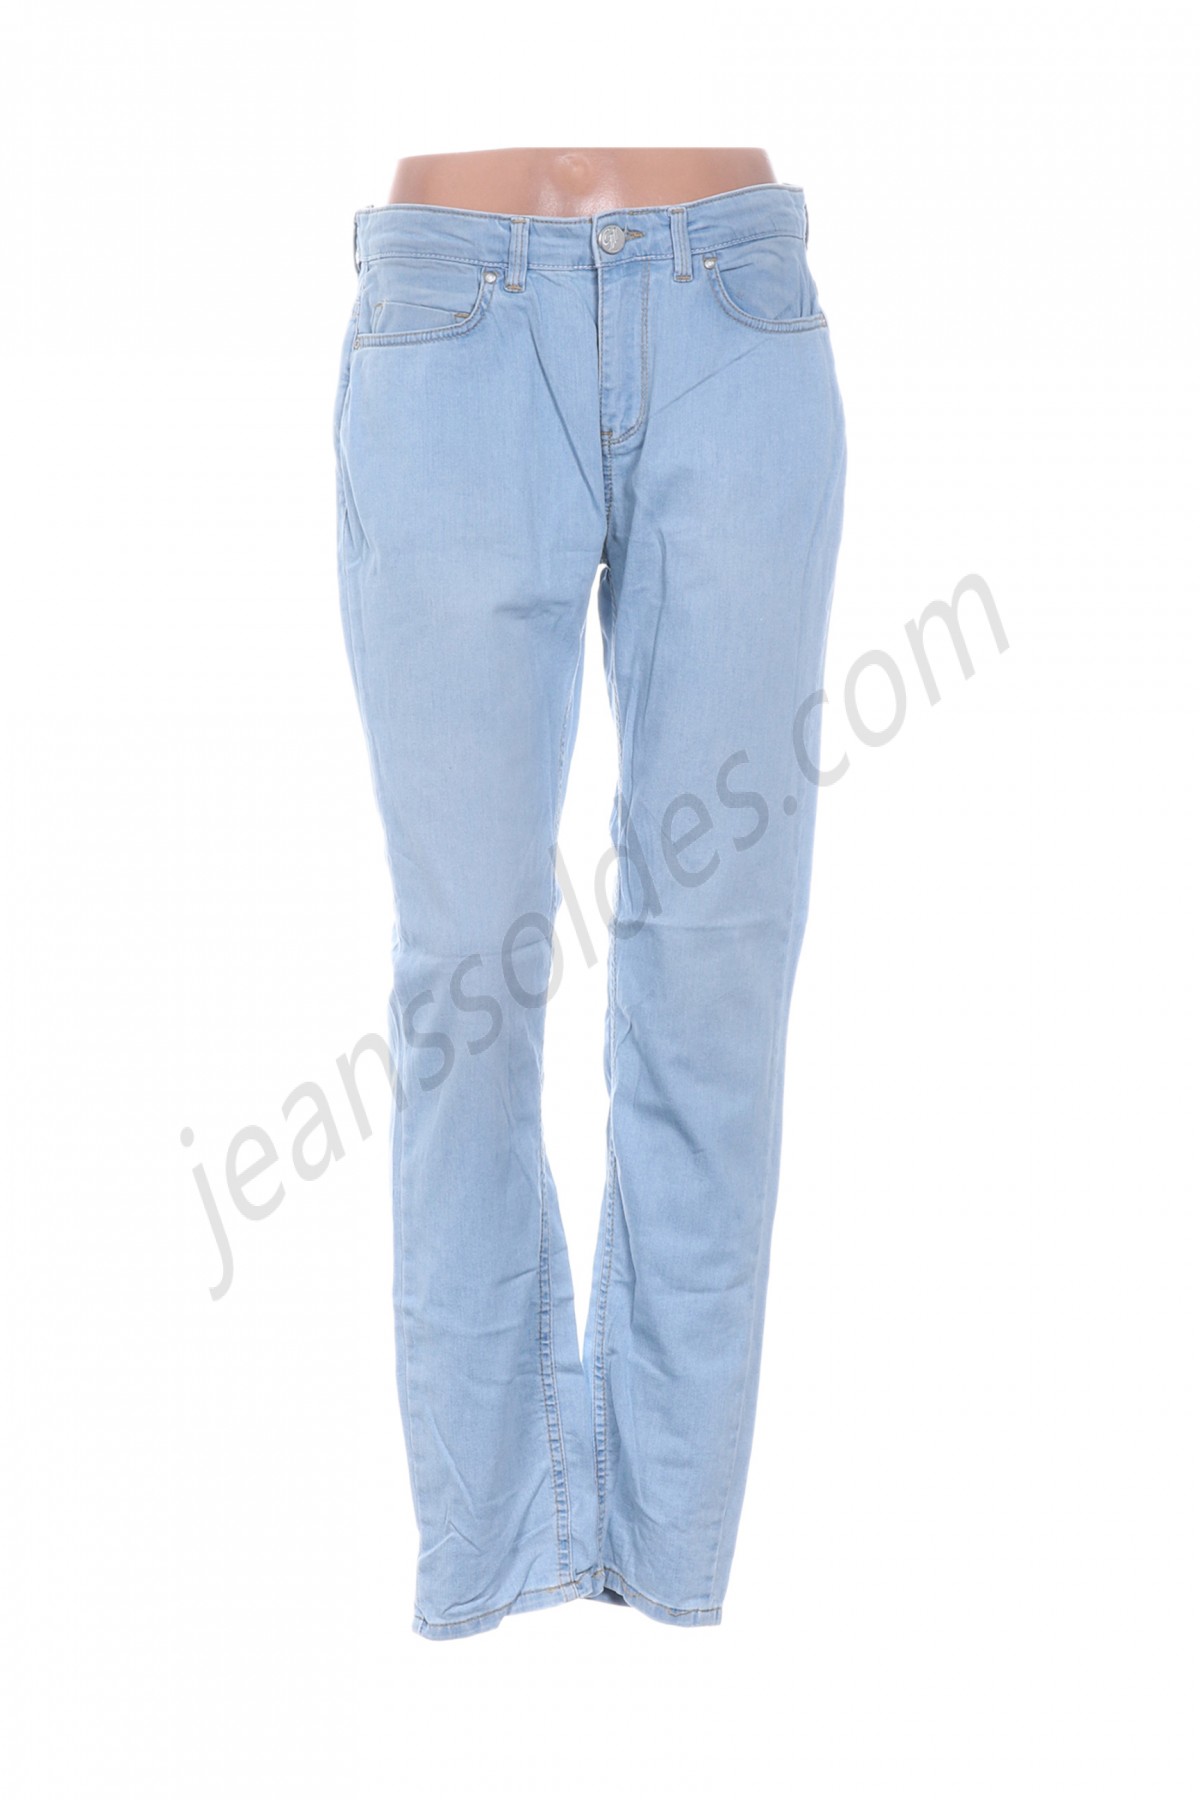 green ice-Jeans coupe slim prix d’amis - -0